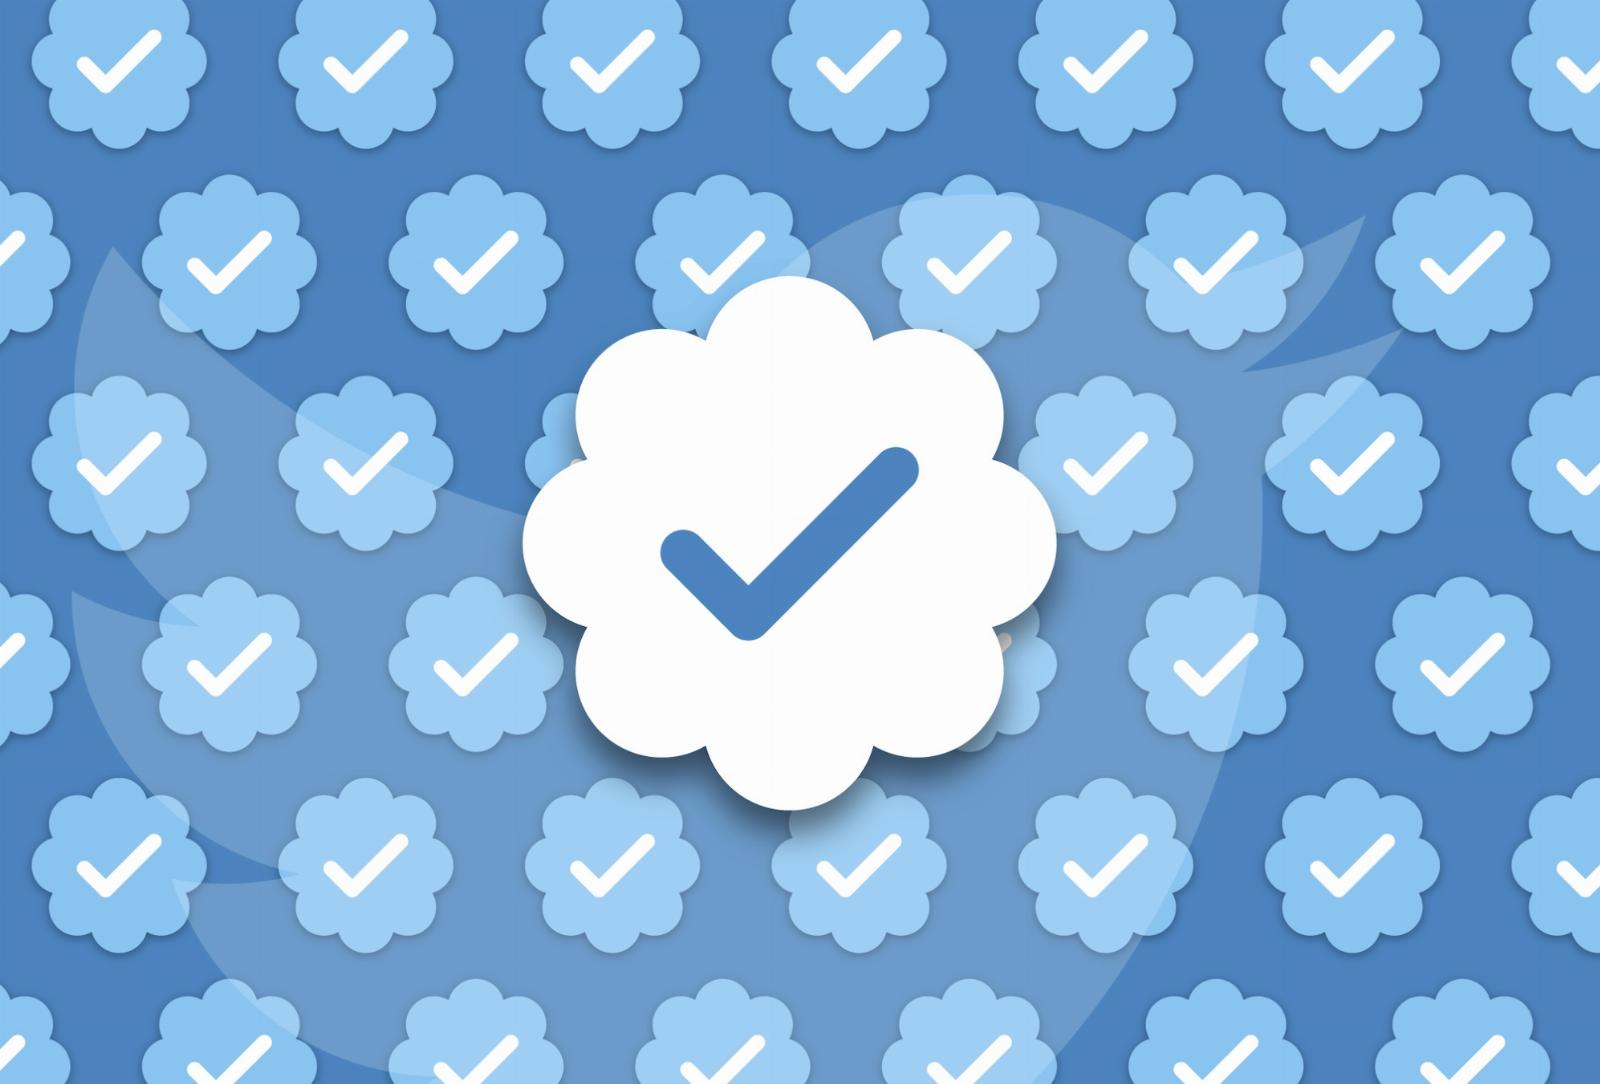 Twitter testing government ID-based verification, new screenshots show